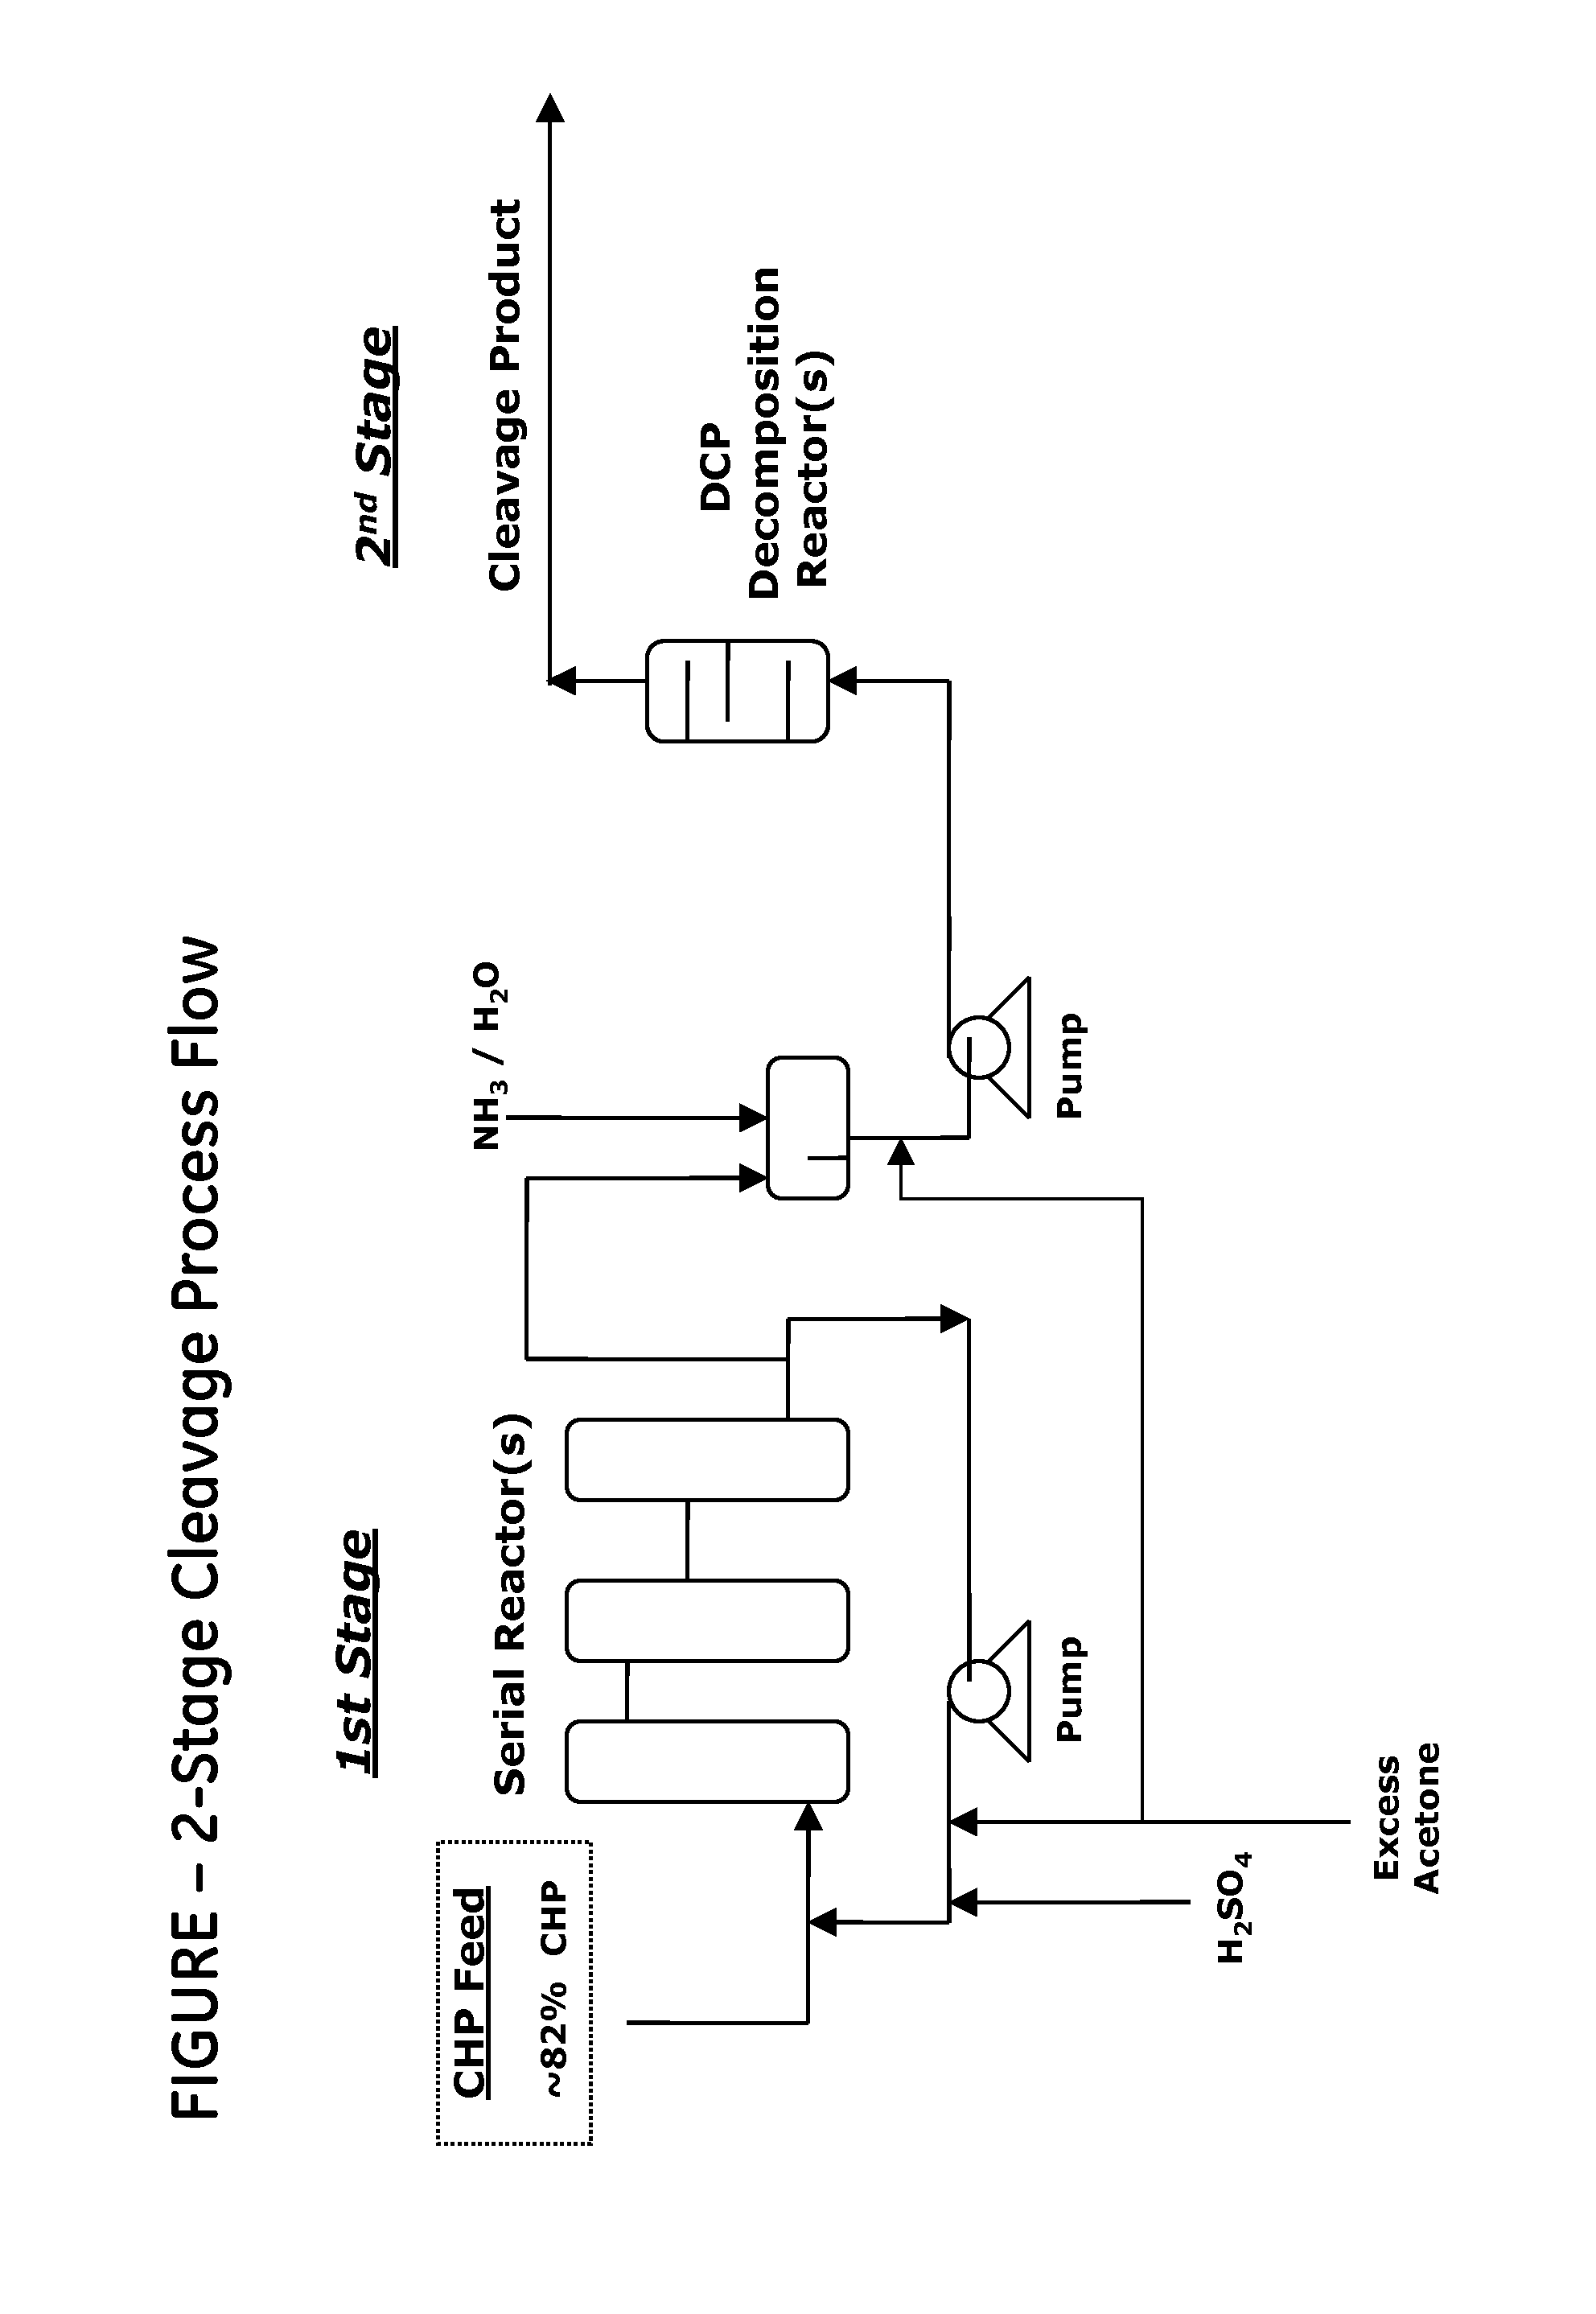 Method for producing phenol and acetone